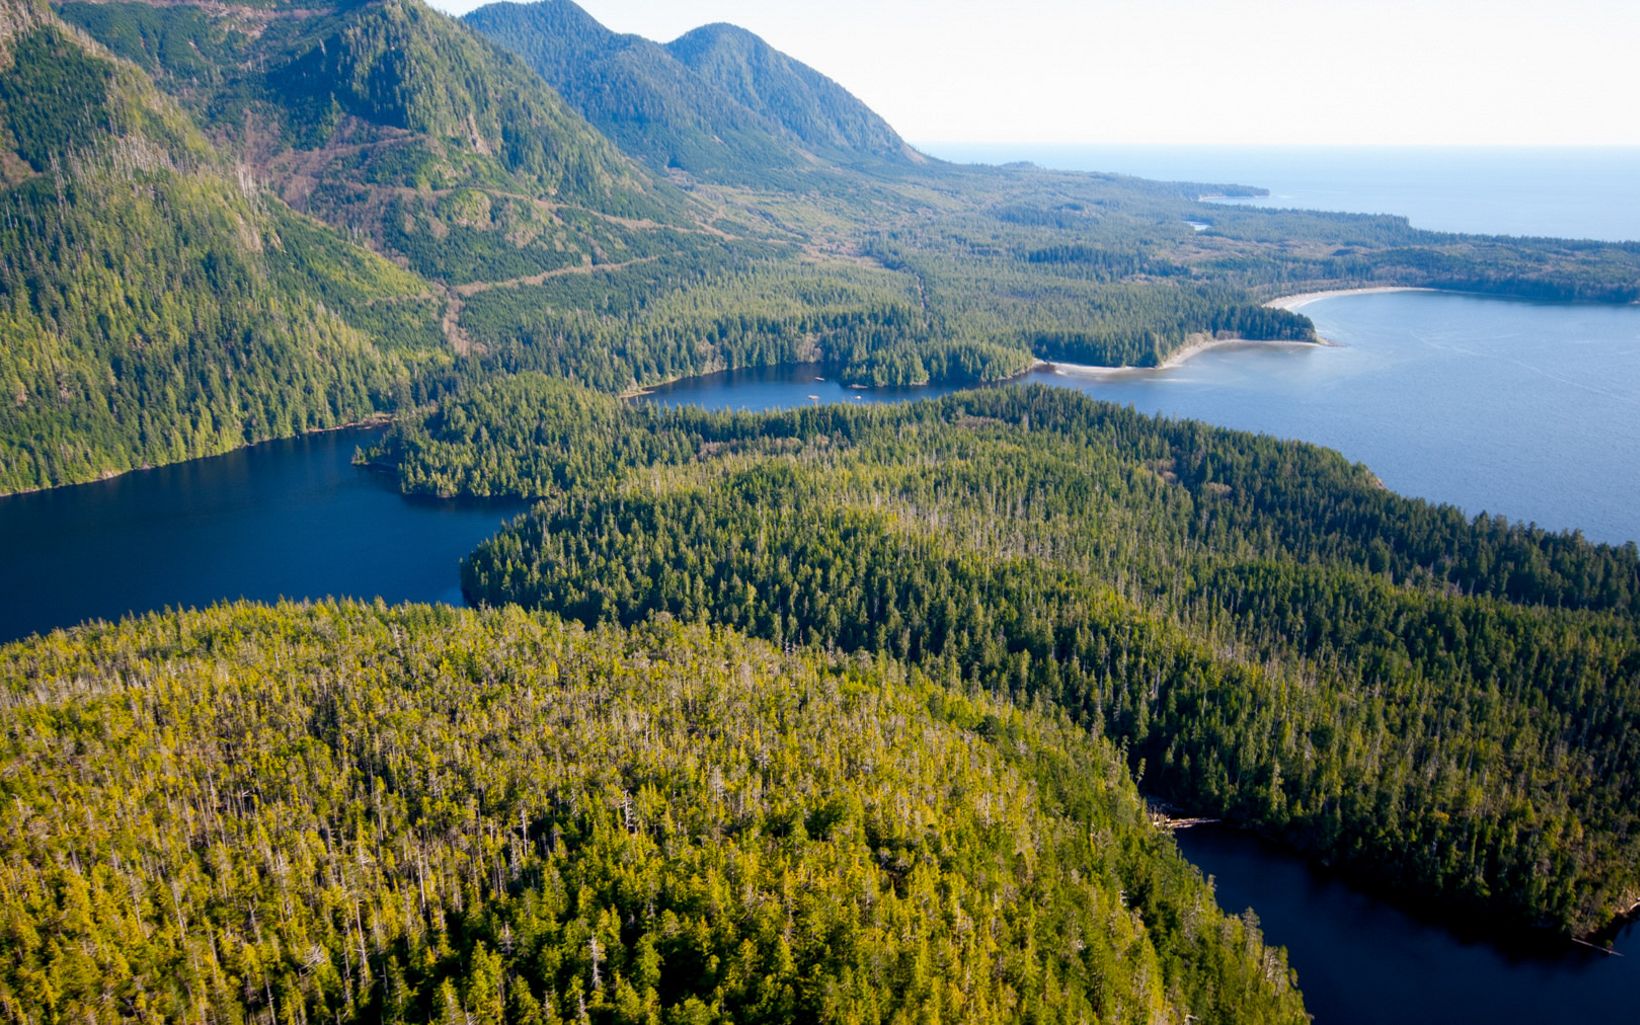  An aerial view of Clayoquot Sound, on the west coast of Vancouver Island in the Canadian province of British Columbia.